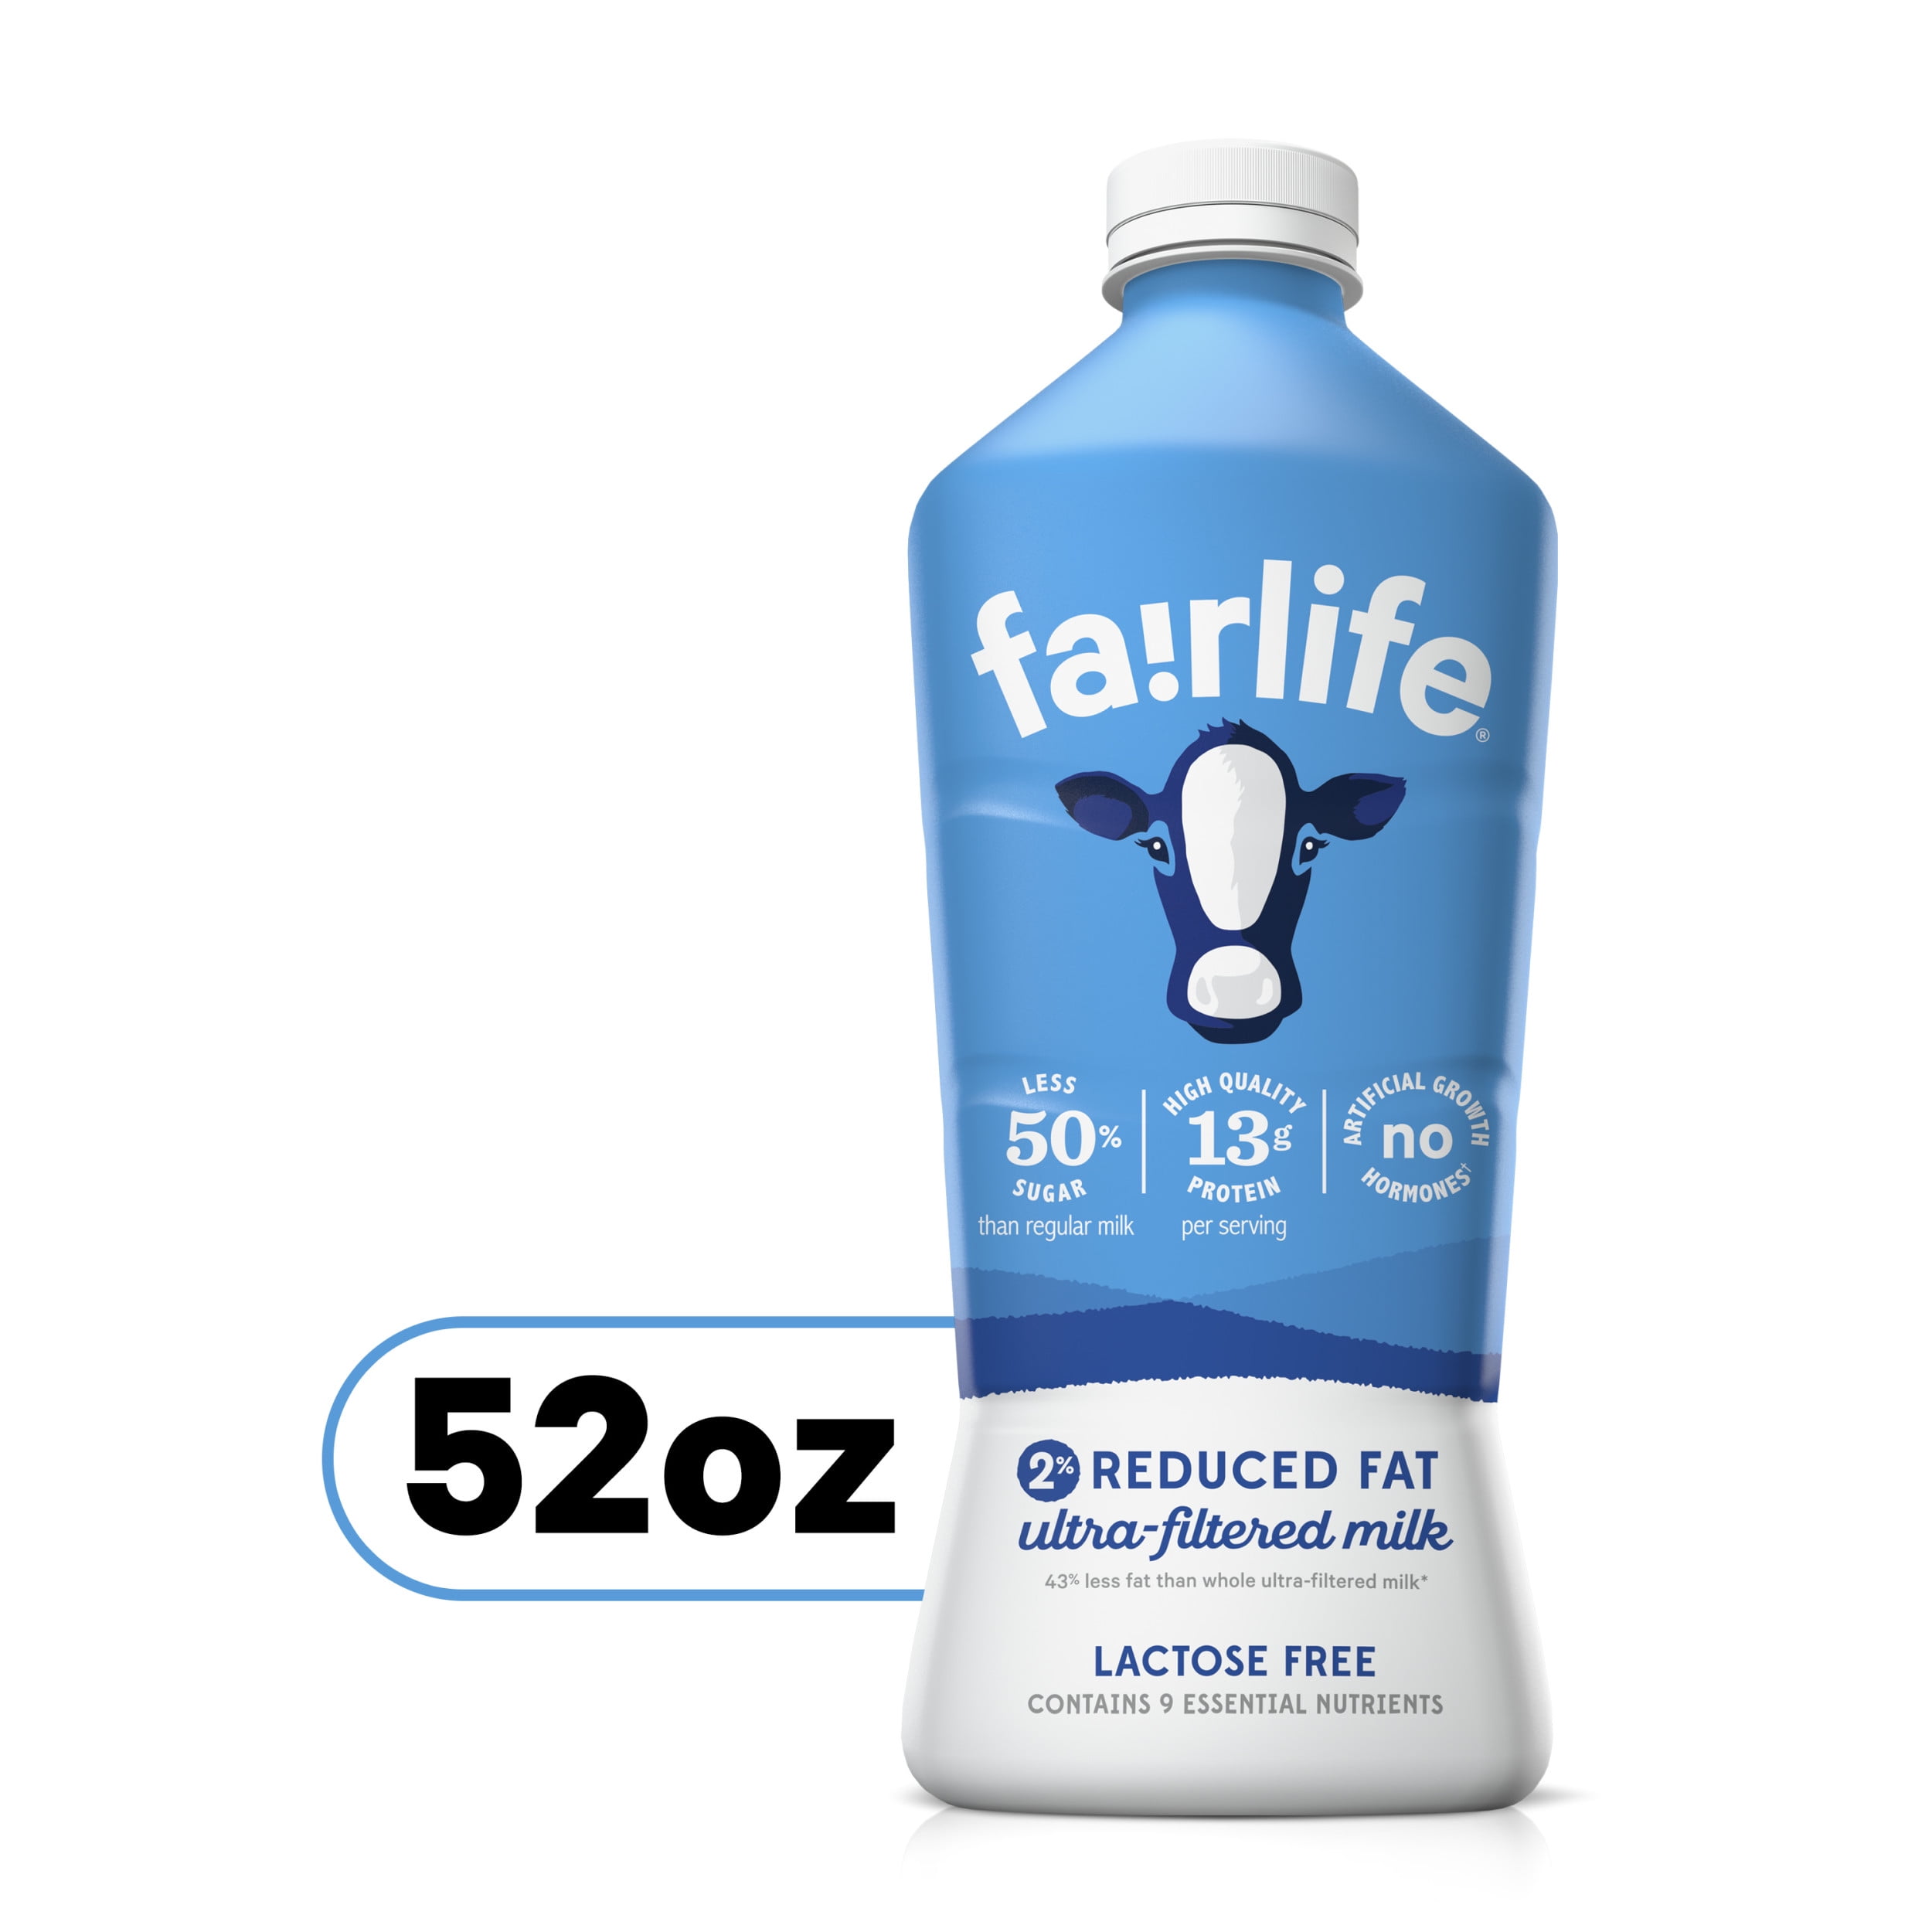 Pros of Fairlife Milk for Weight Loss